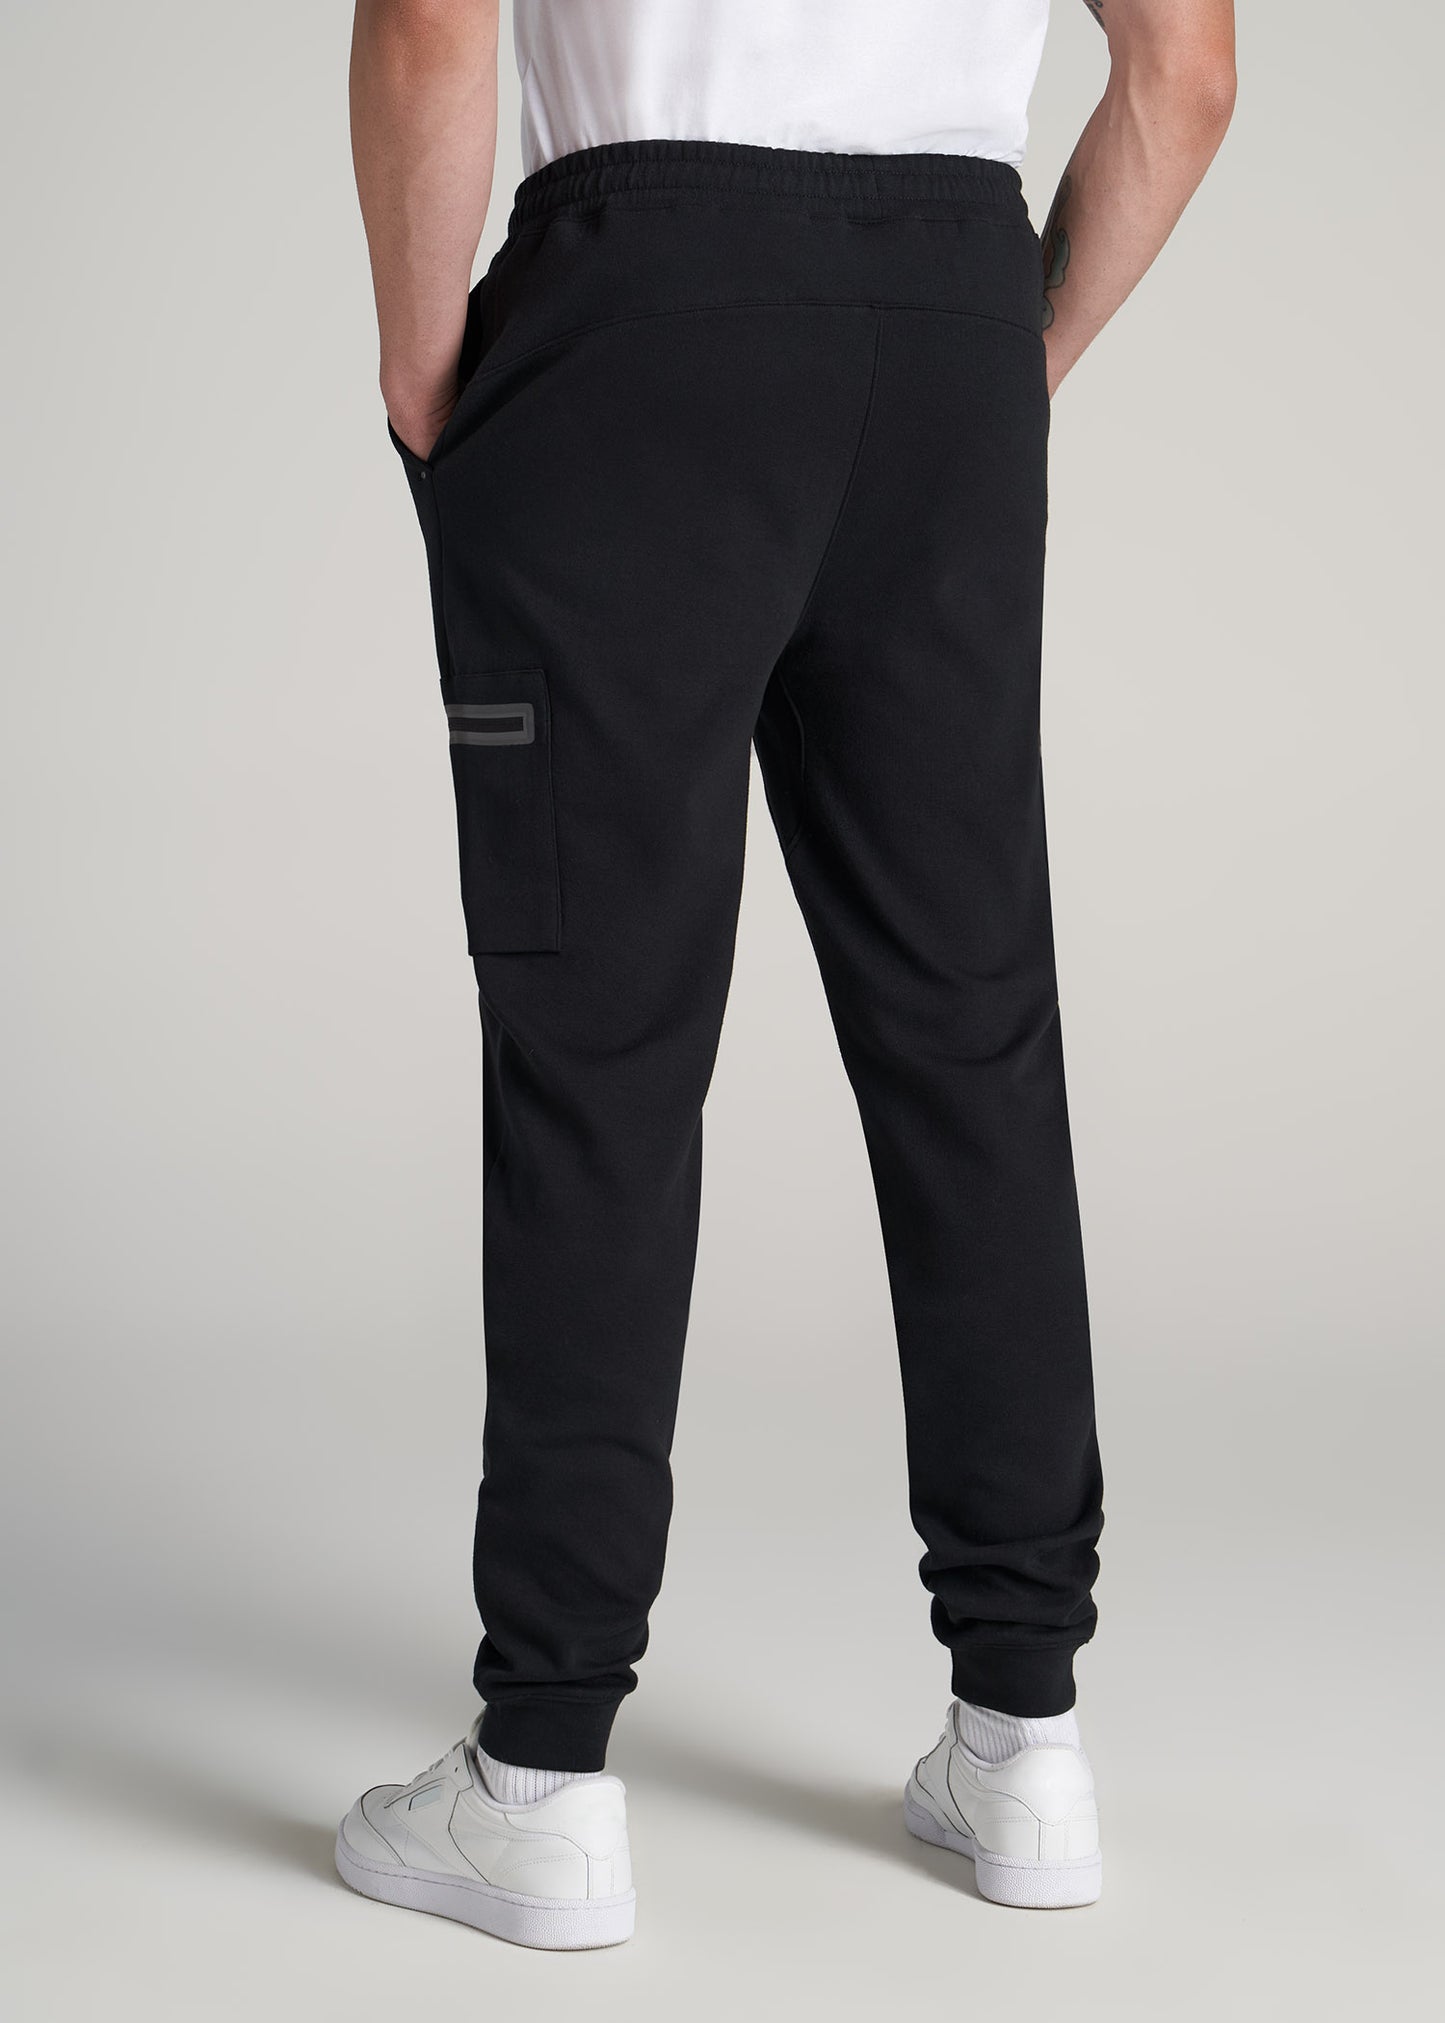 Black Utility Cargo Joggers For Tall Men